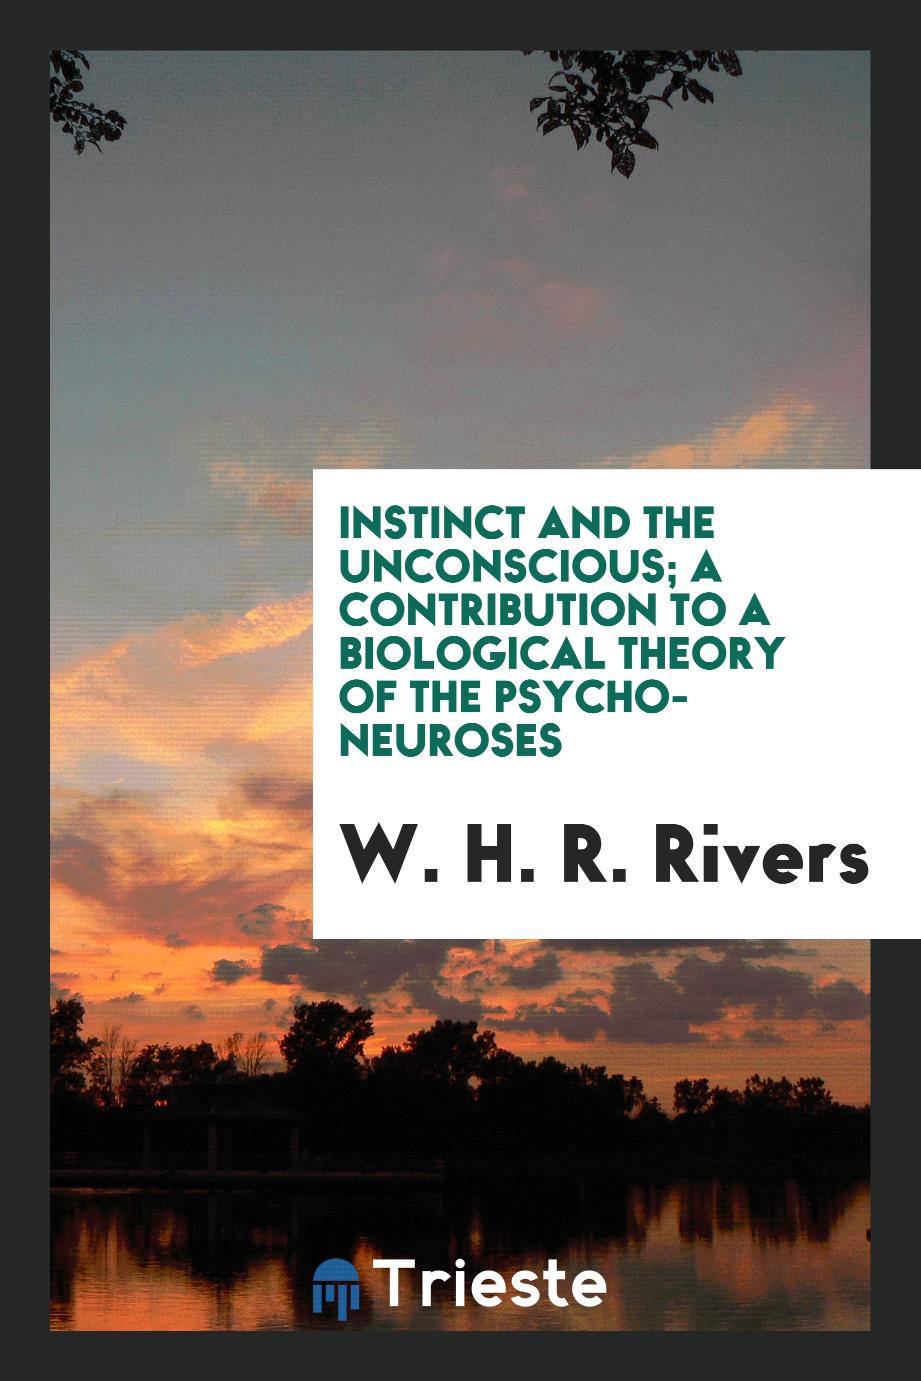 Instinct and the unconscious; a contribution to a biological theory of the psycho-neuroses